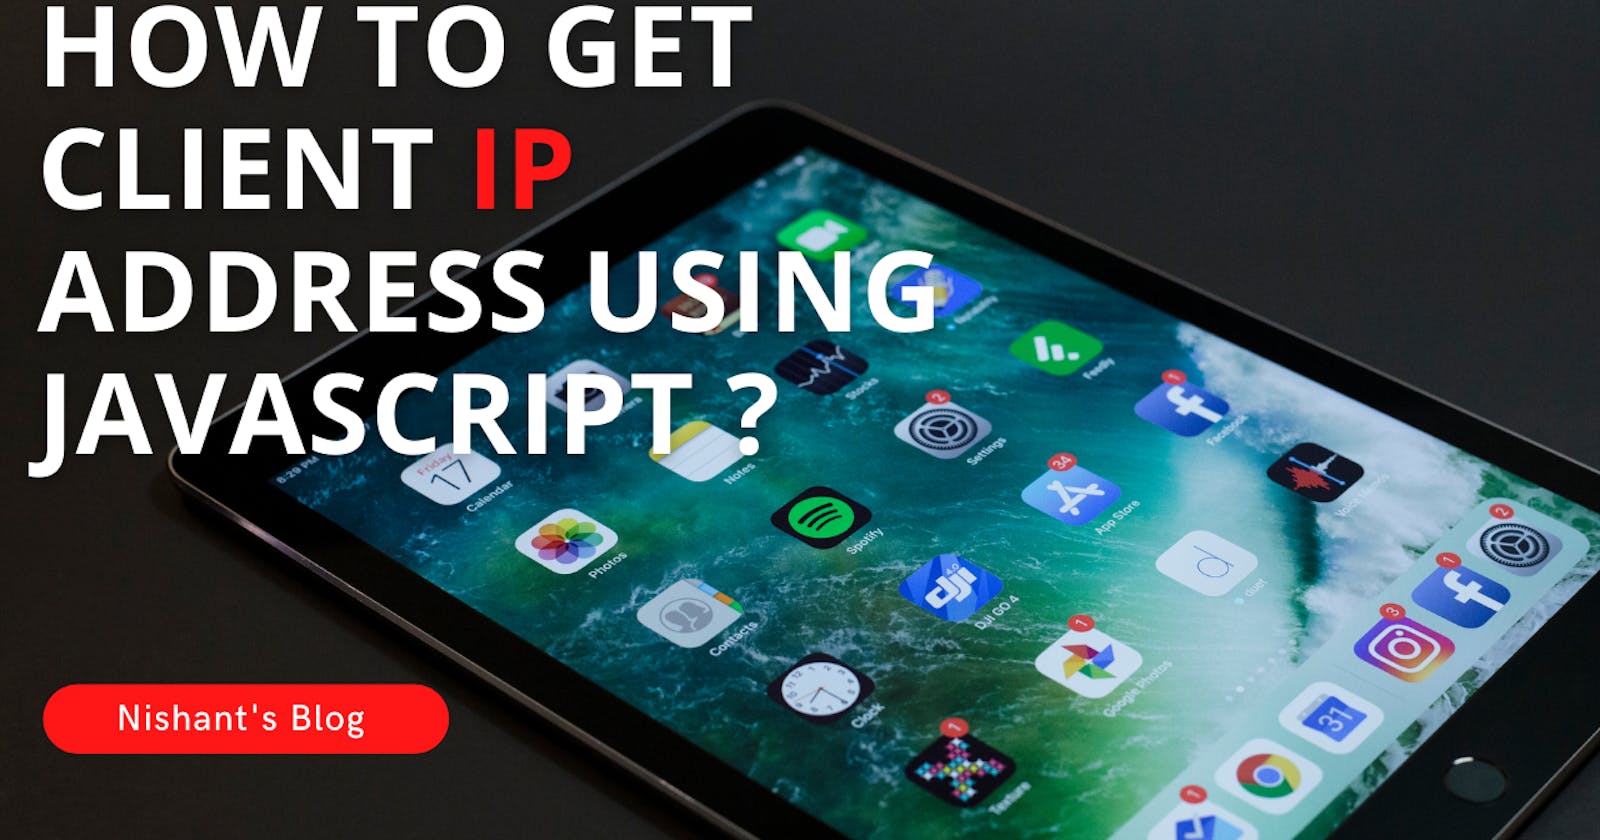 How to get a client IP address using JavaScript?